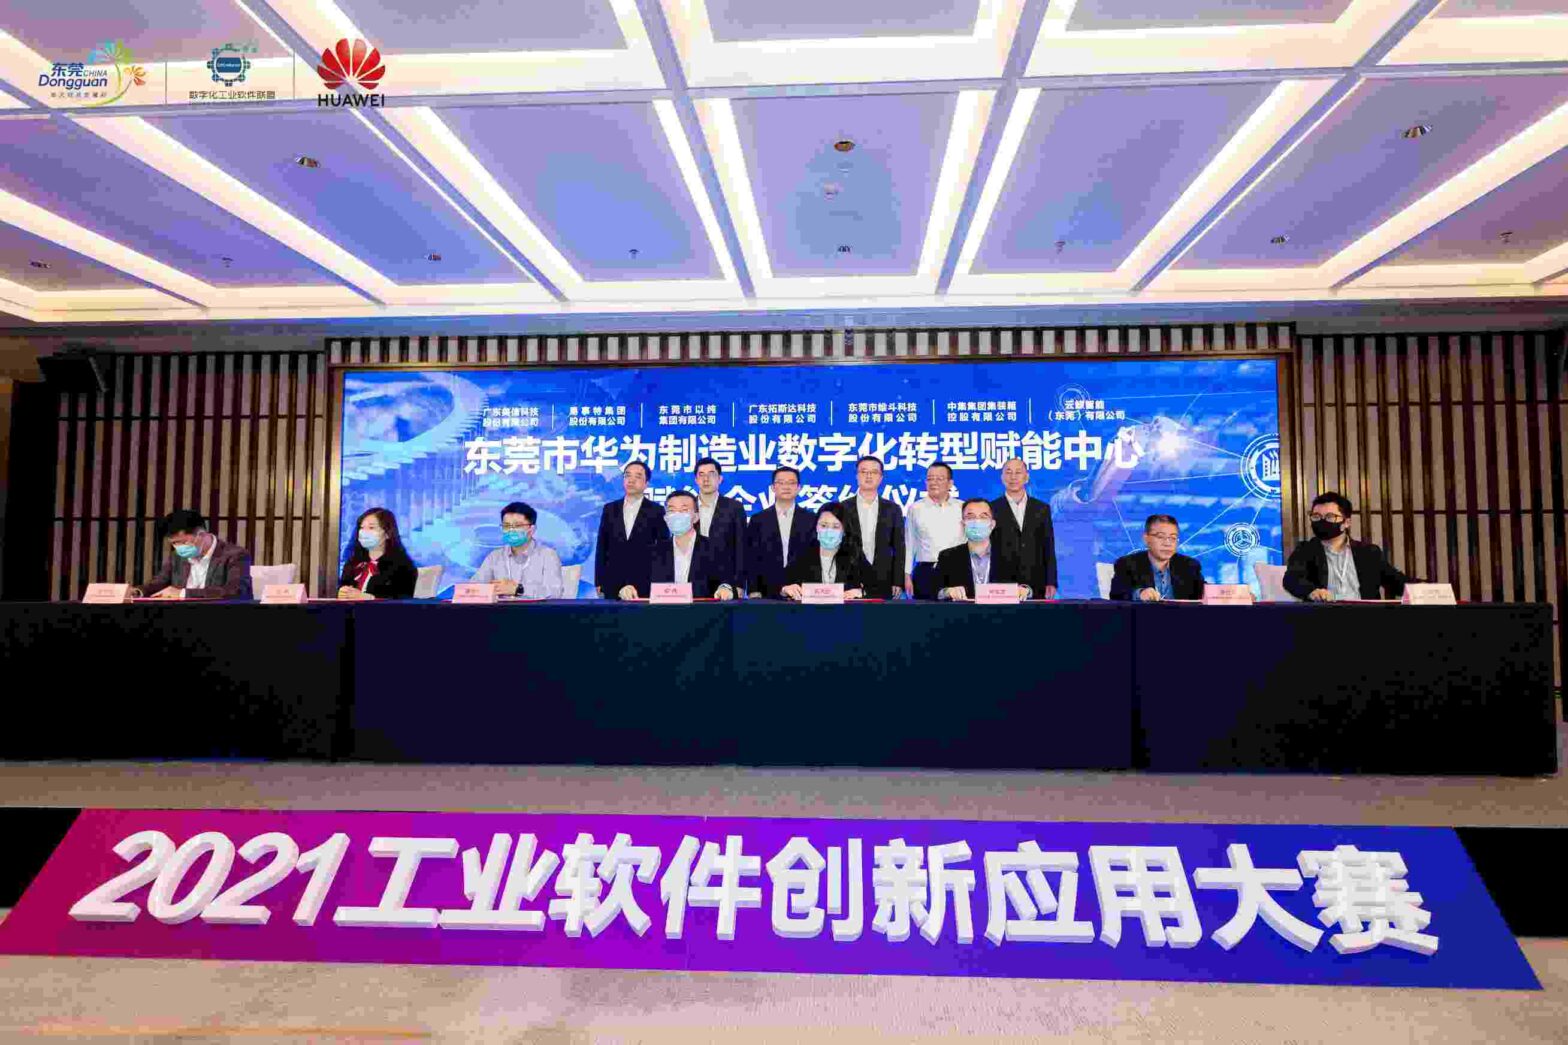 The signing ceremony of Huawei's empowerment center